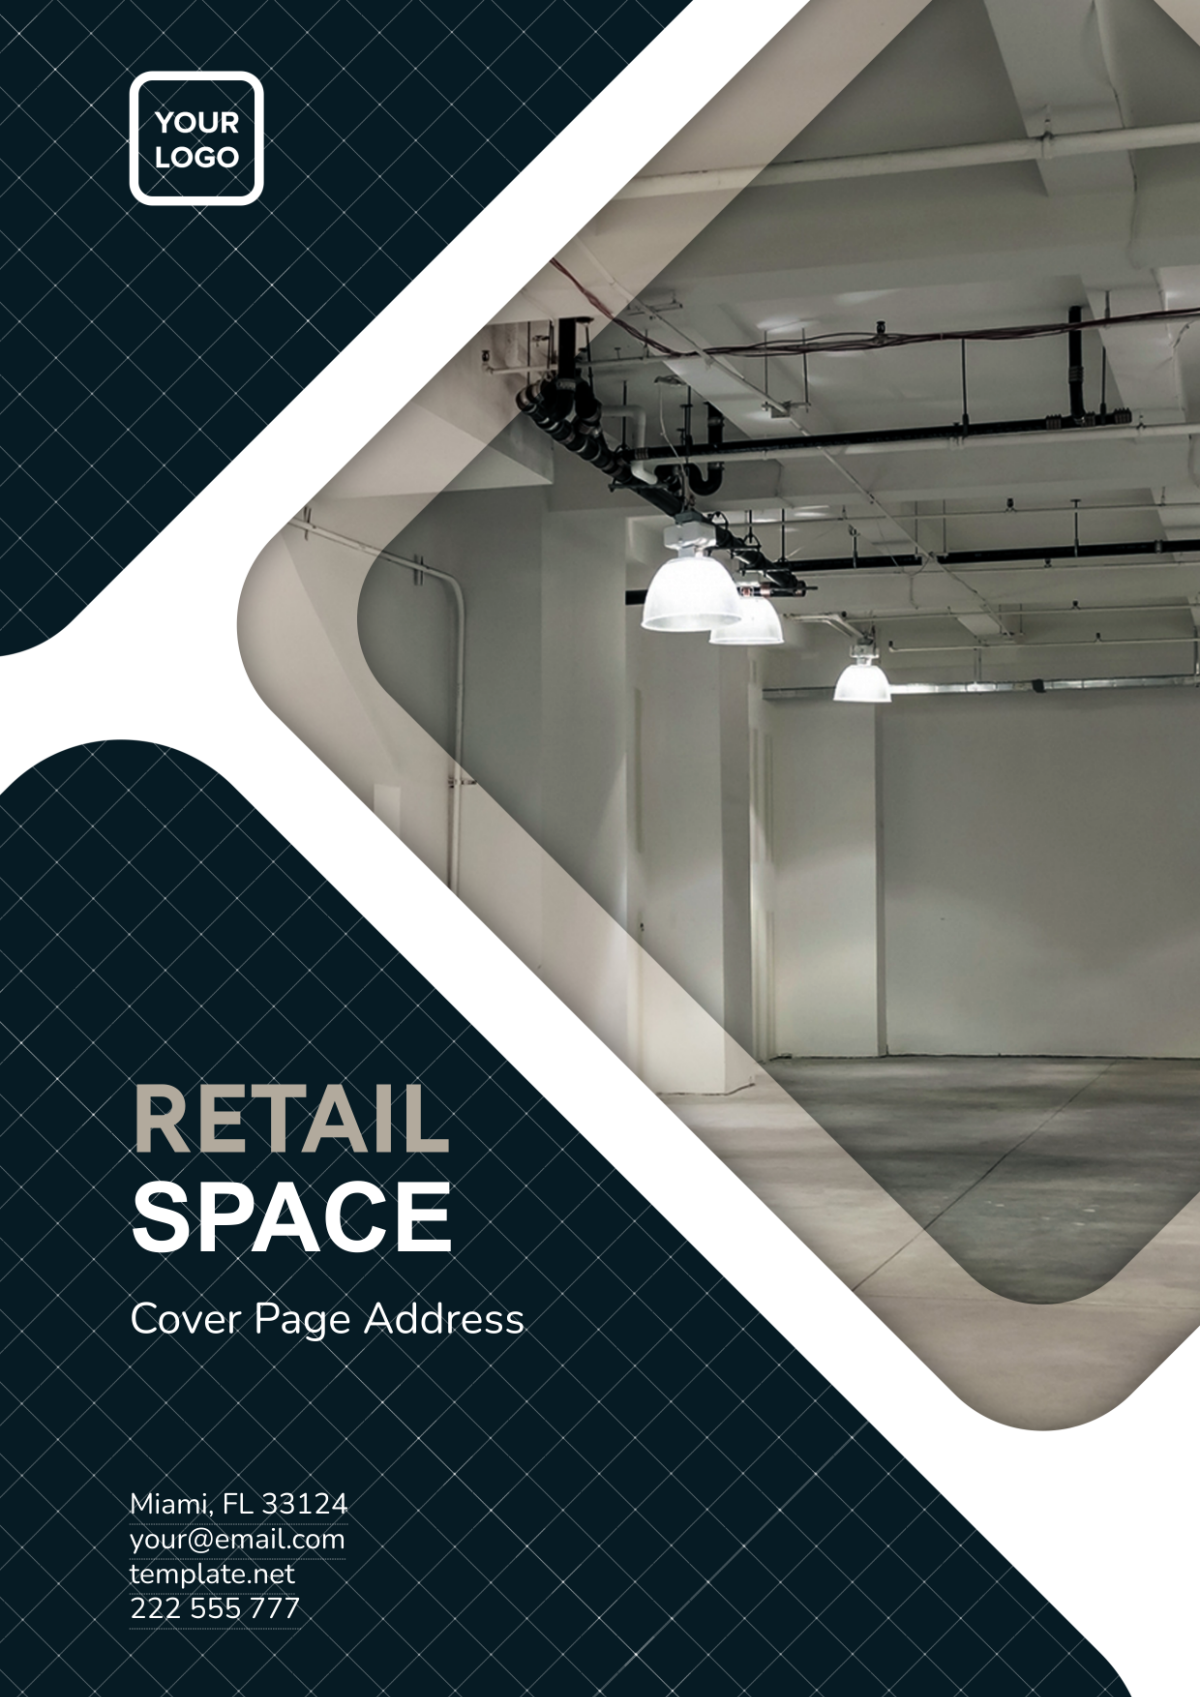 Retail Space Cover Page Address Template